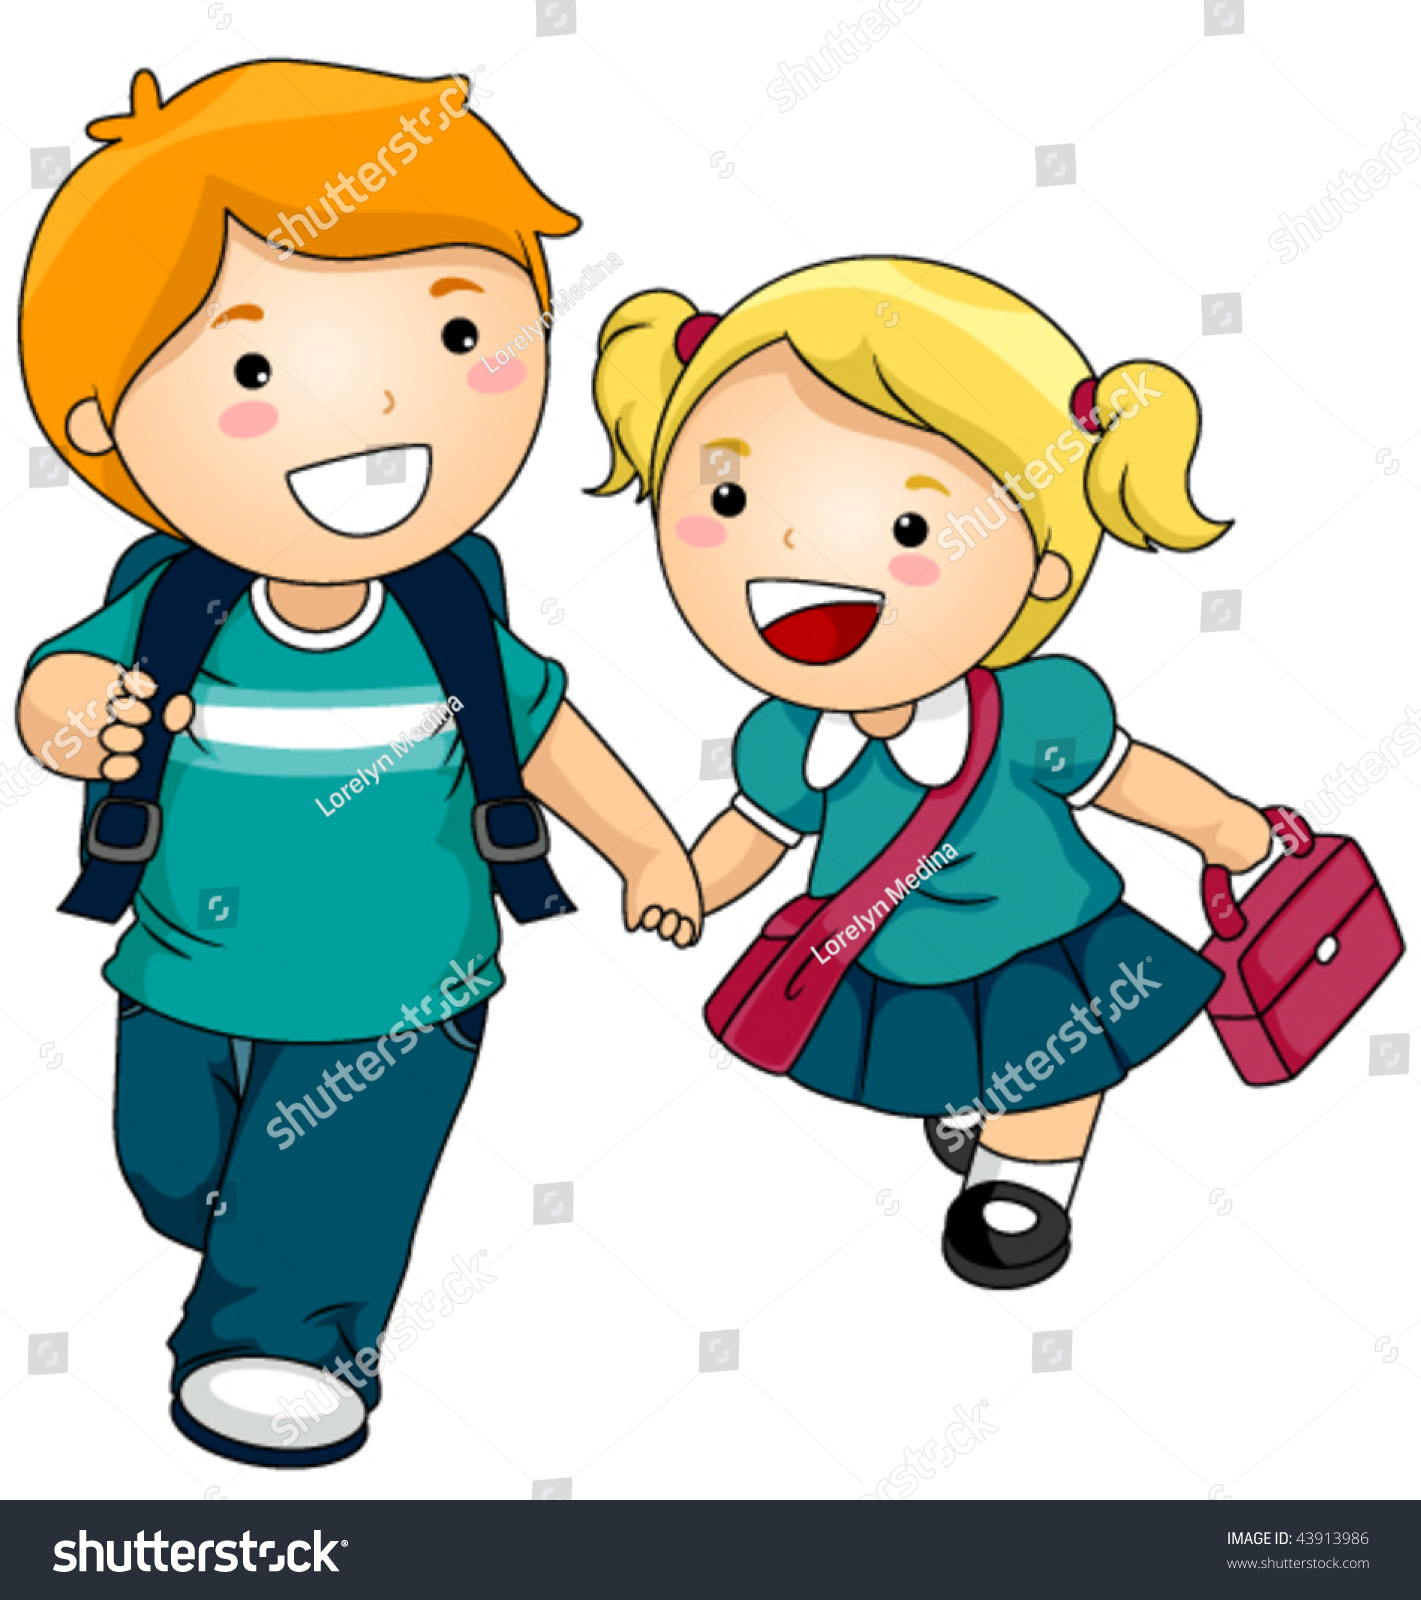 clipart going back to school - photo #21